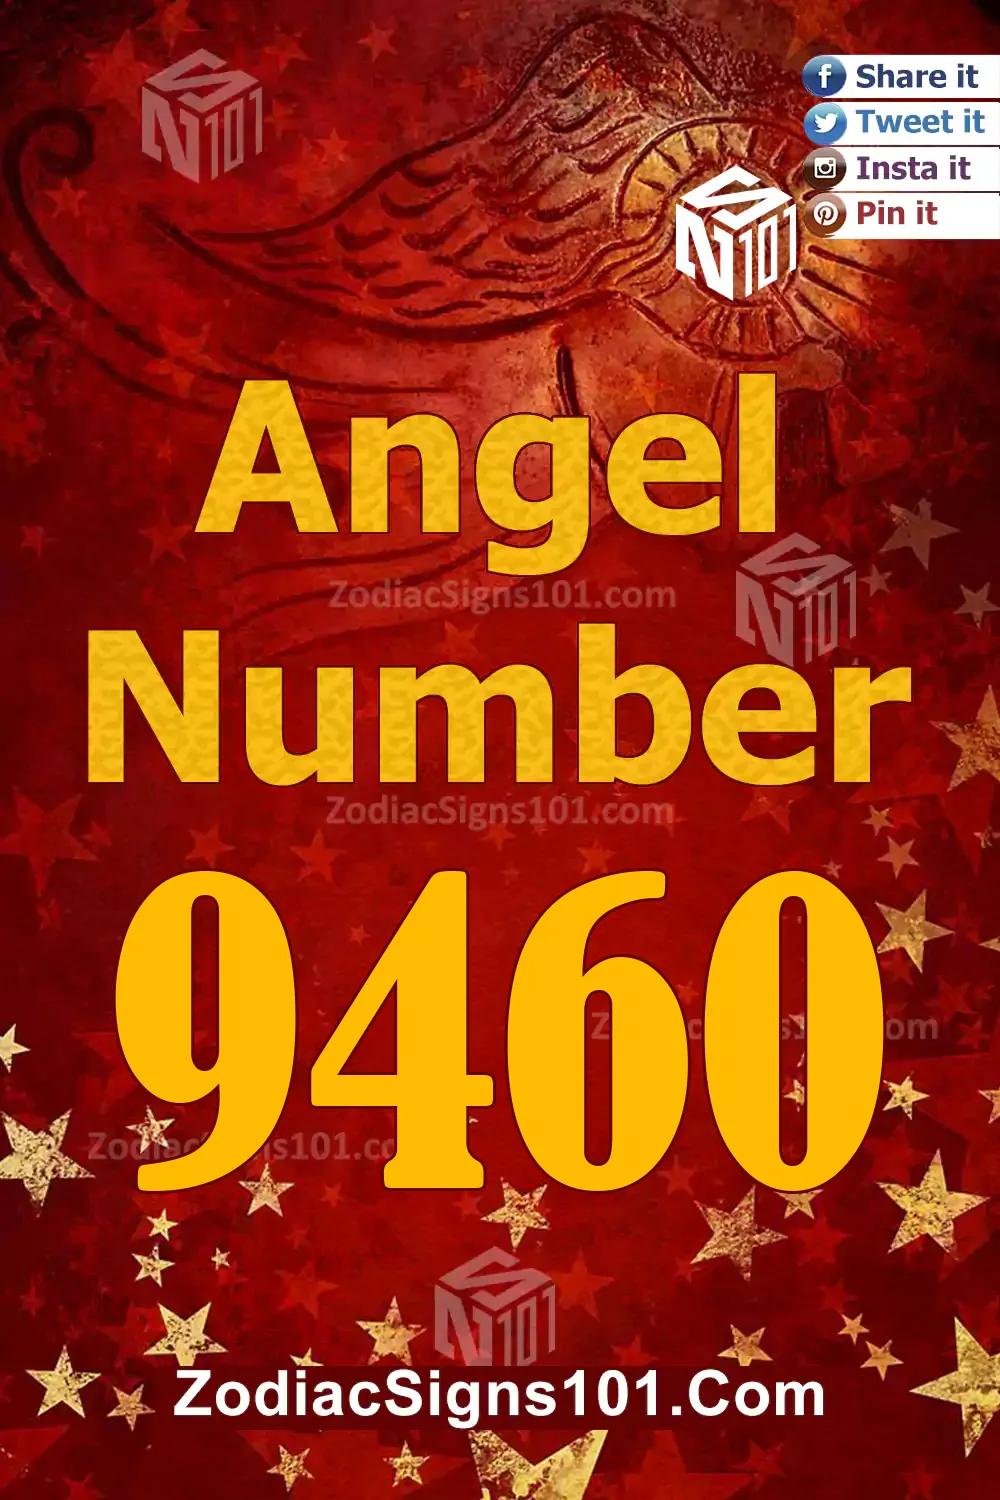 9460 Angel Number Meaning